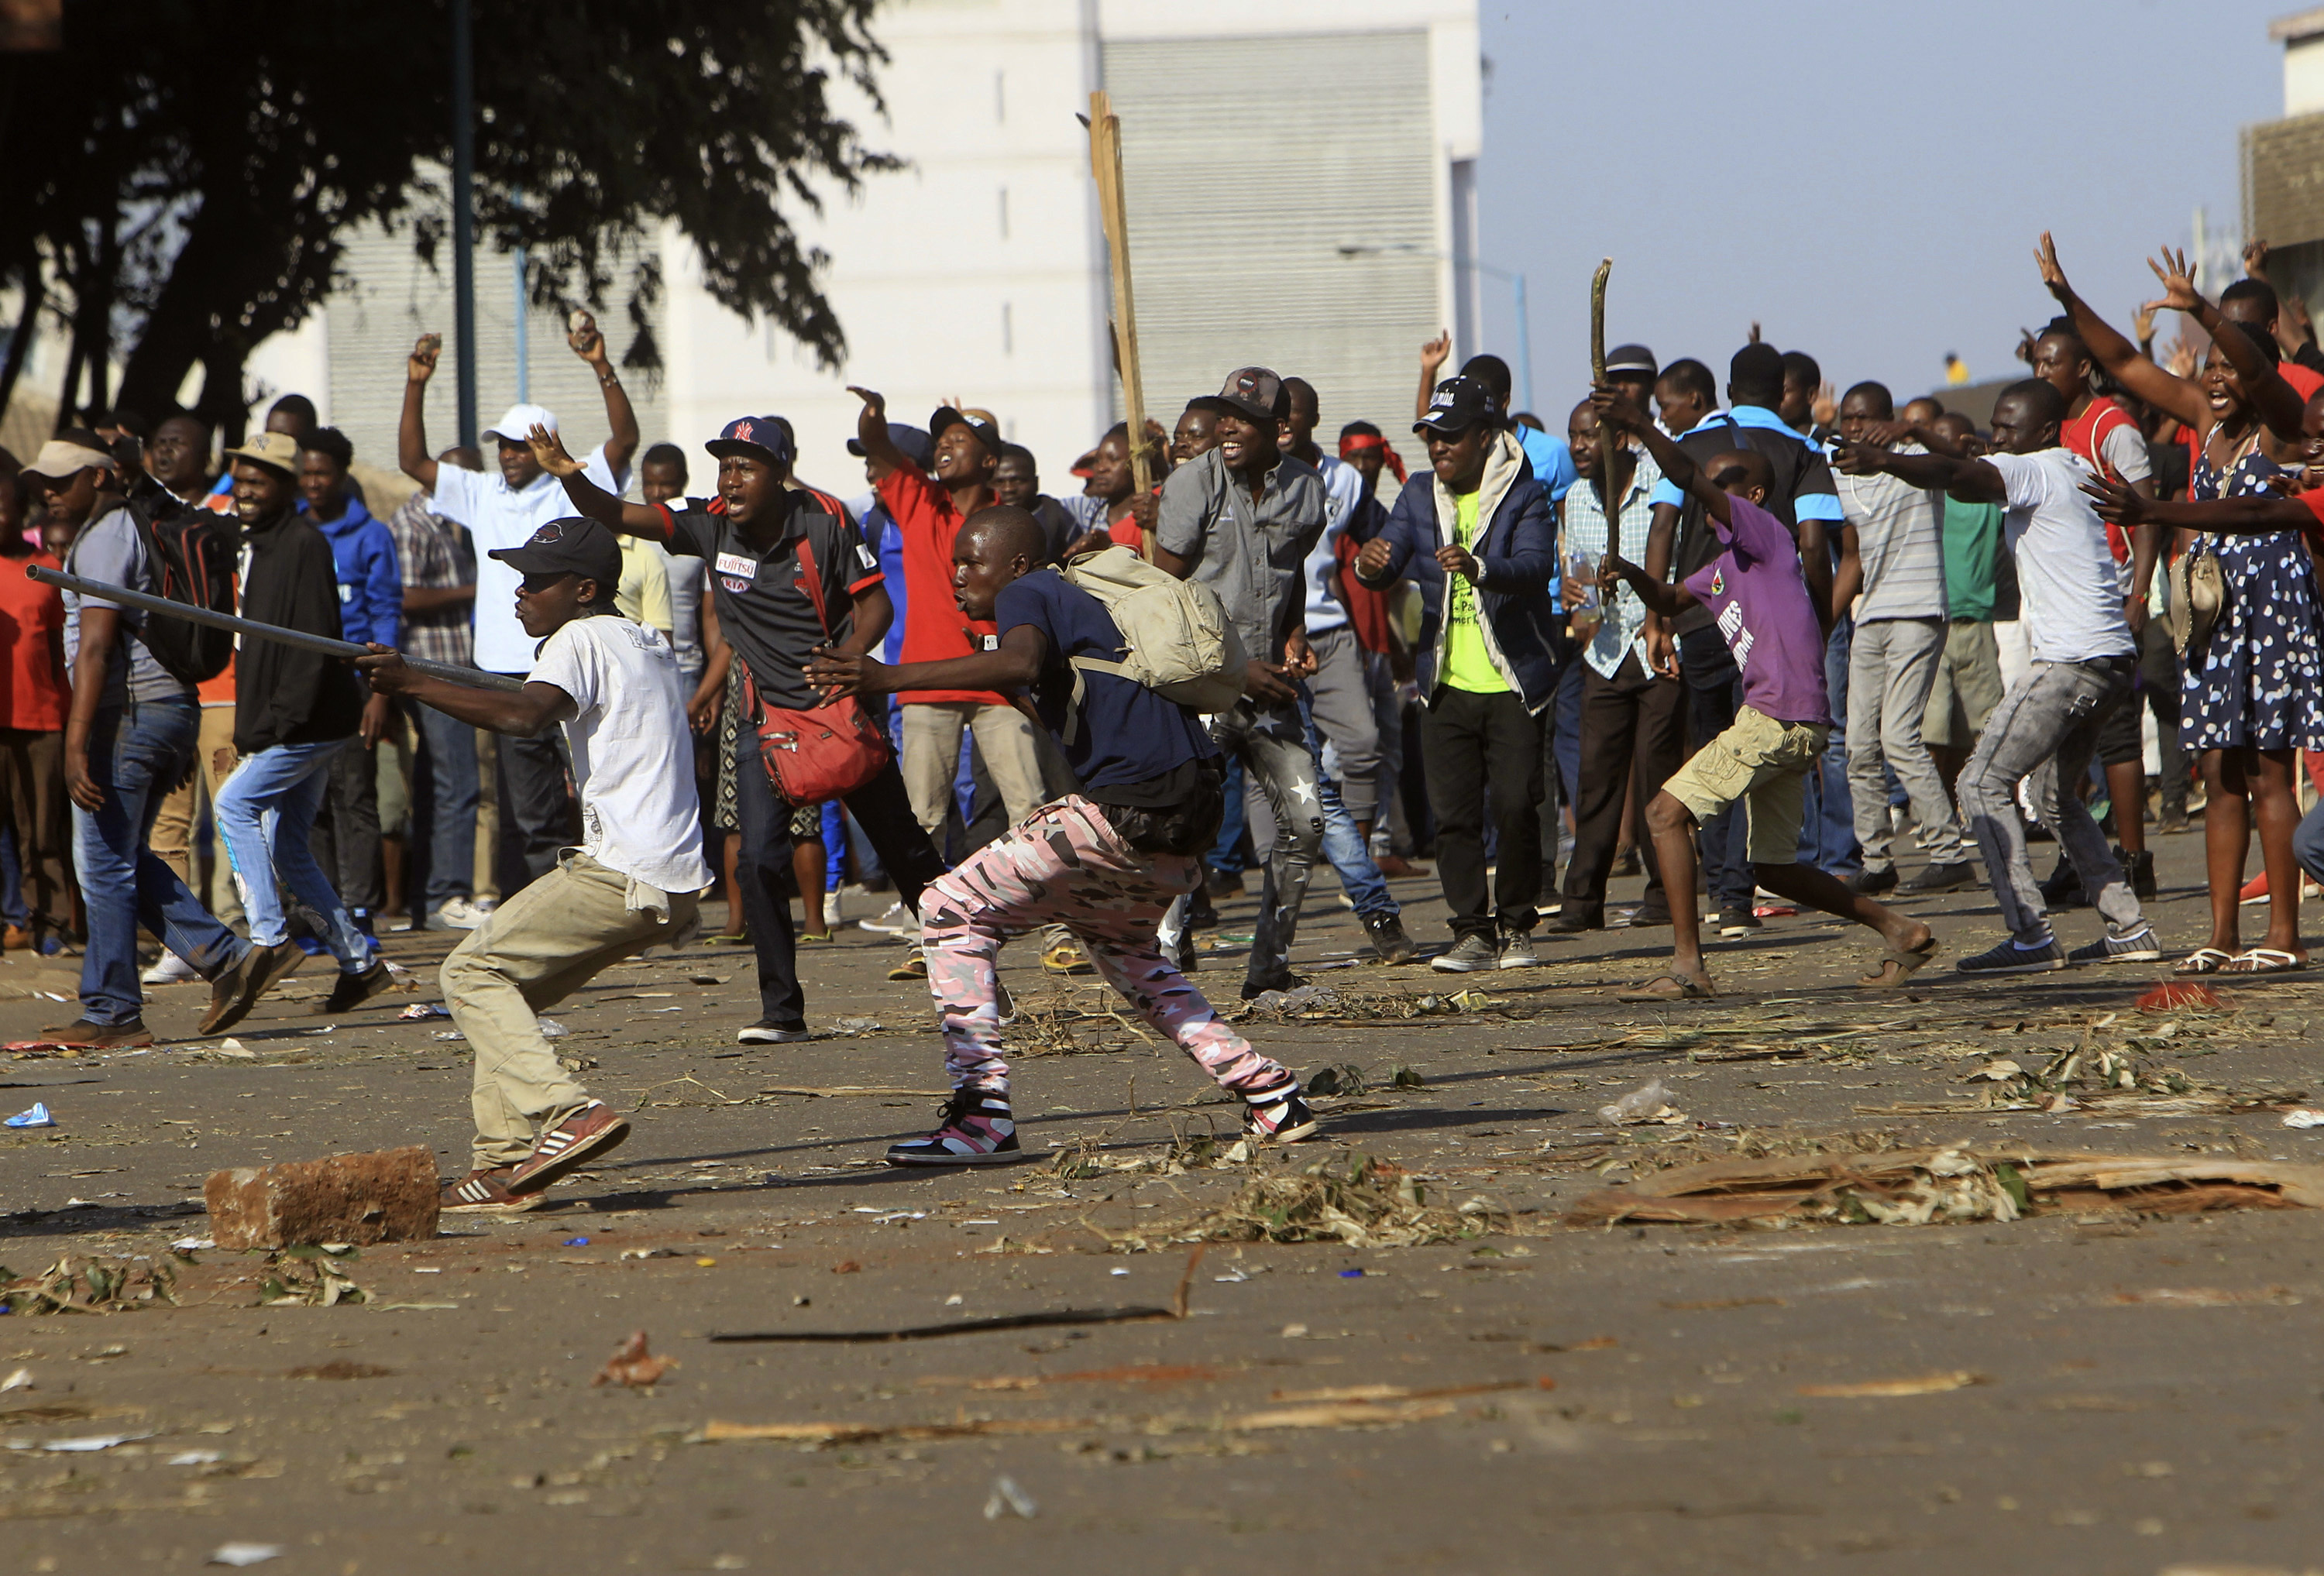 Opposition party supporters react after police fire tear gas in Harare